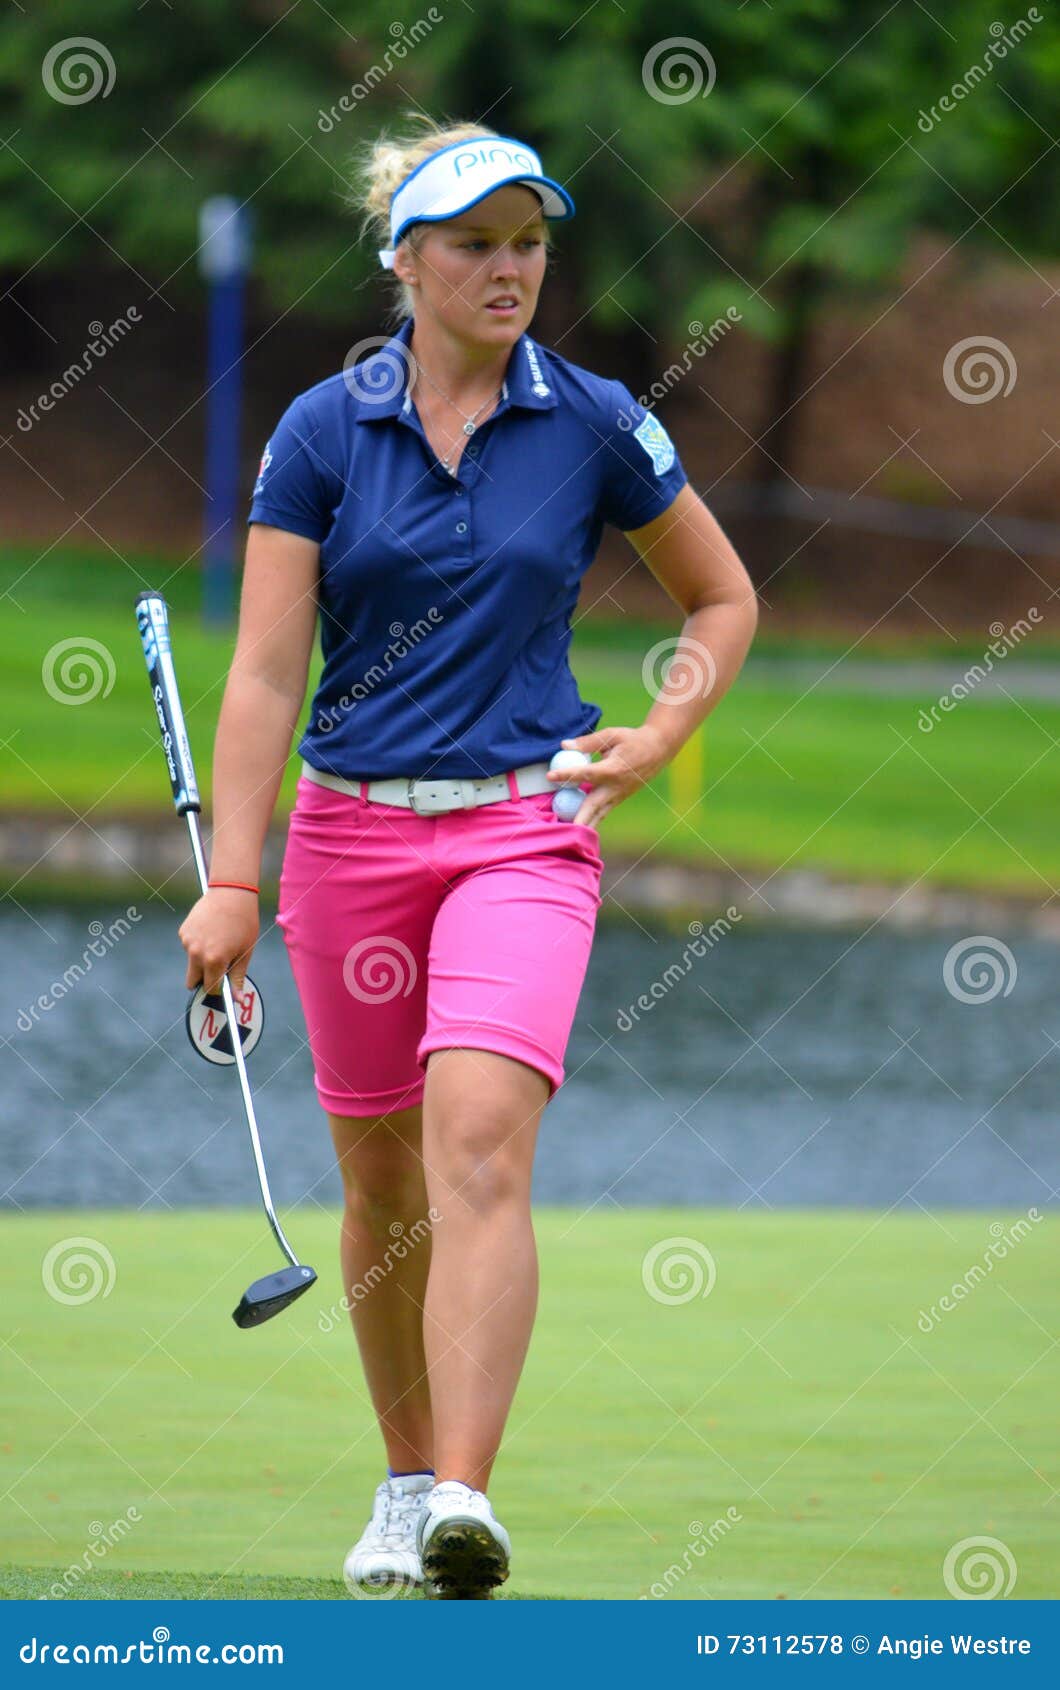 Pictures brooke henderson Fighting putter